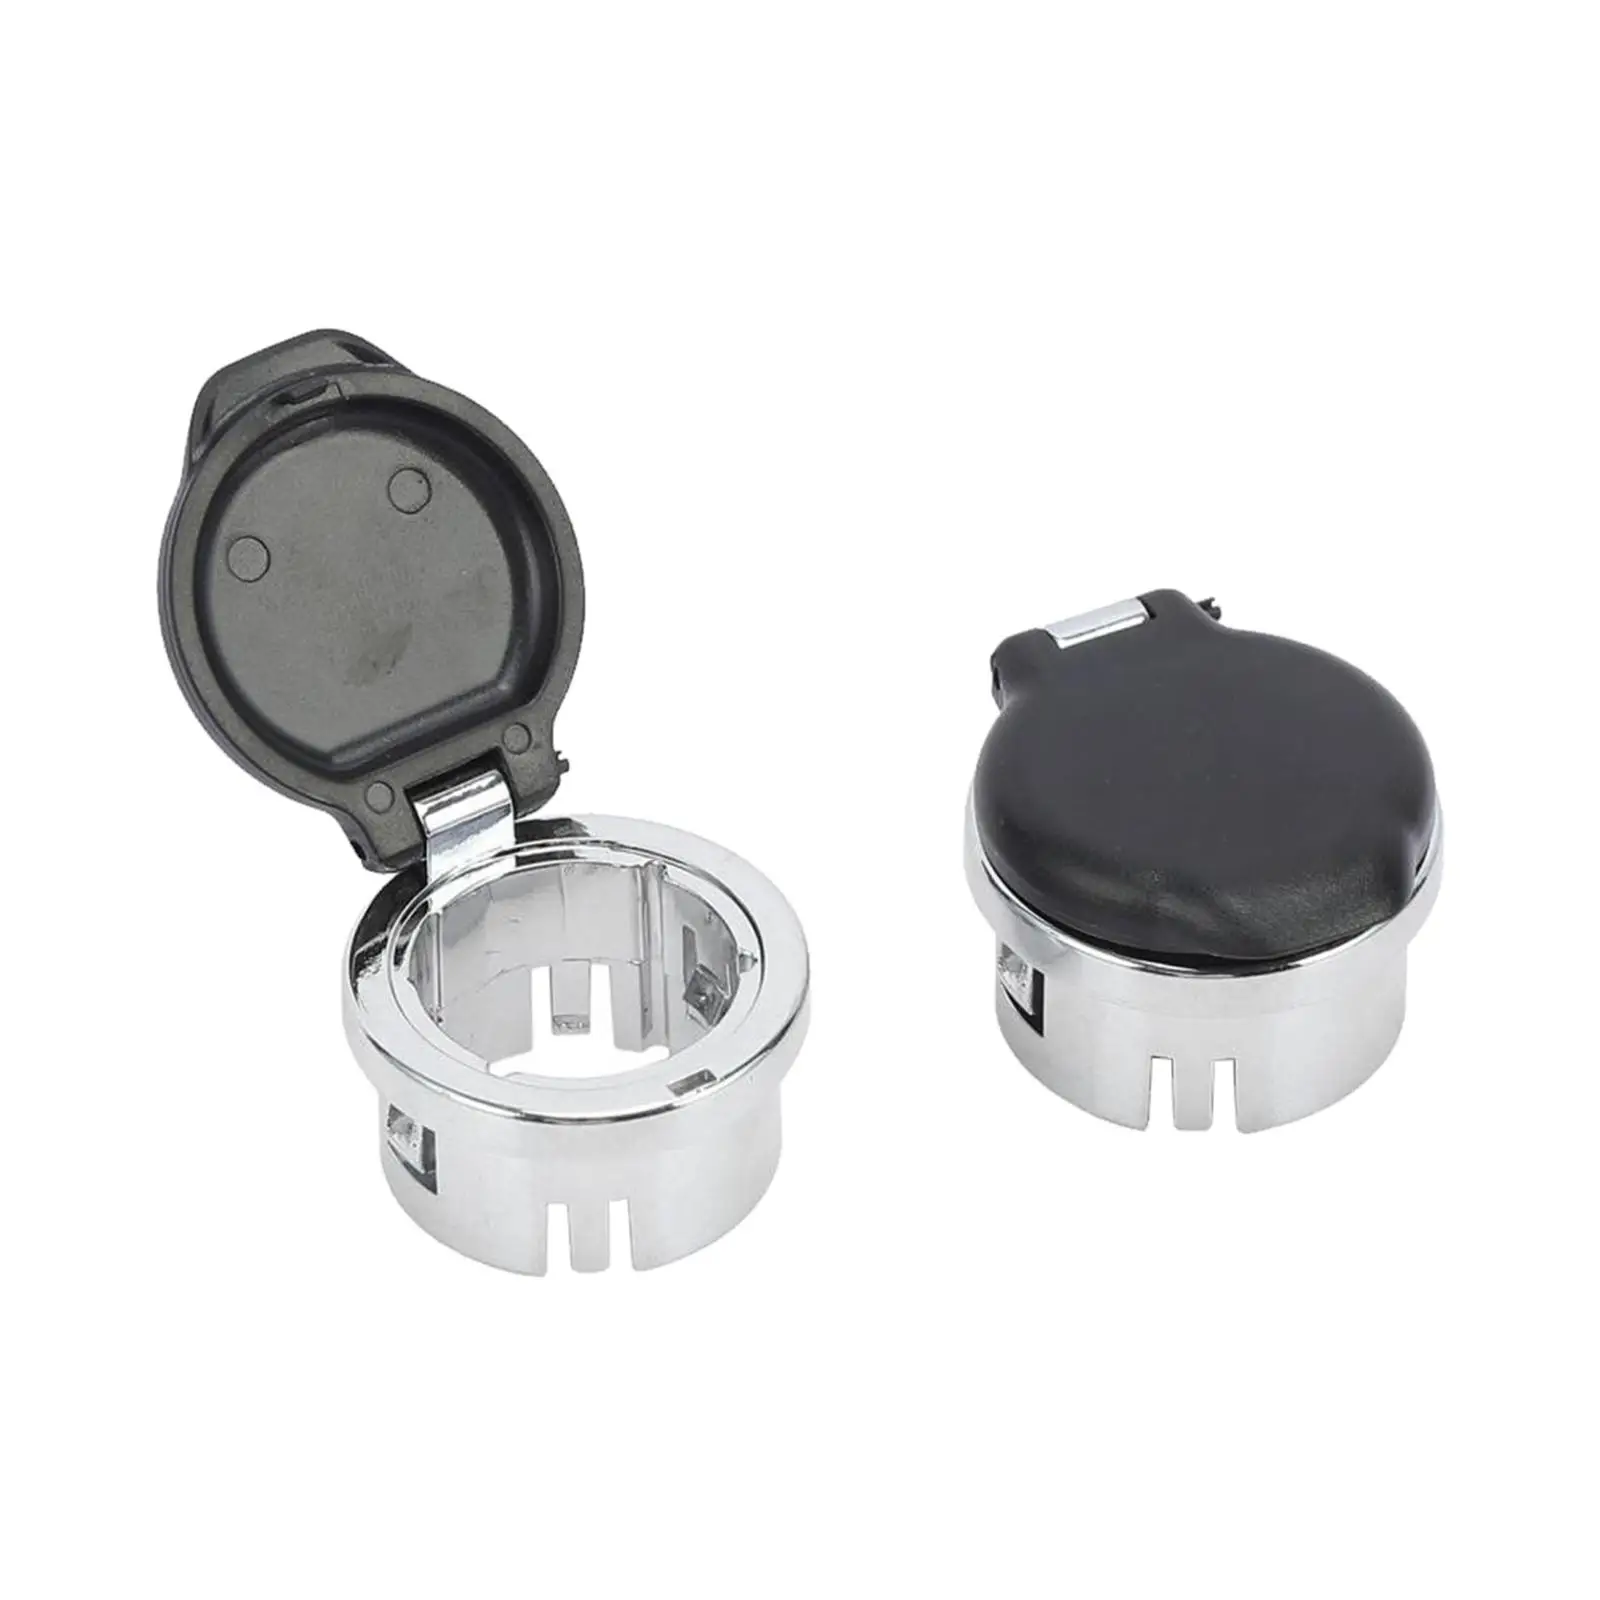 2 Pieces Dash Power Outlet Covers 20983936 12V Cigarette Lighter Plug Cover for Chevrolet Sierra Tahoe High Quality Replace